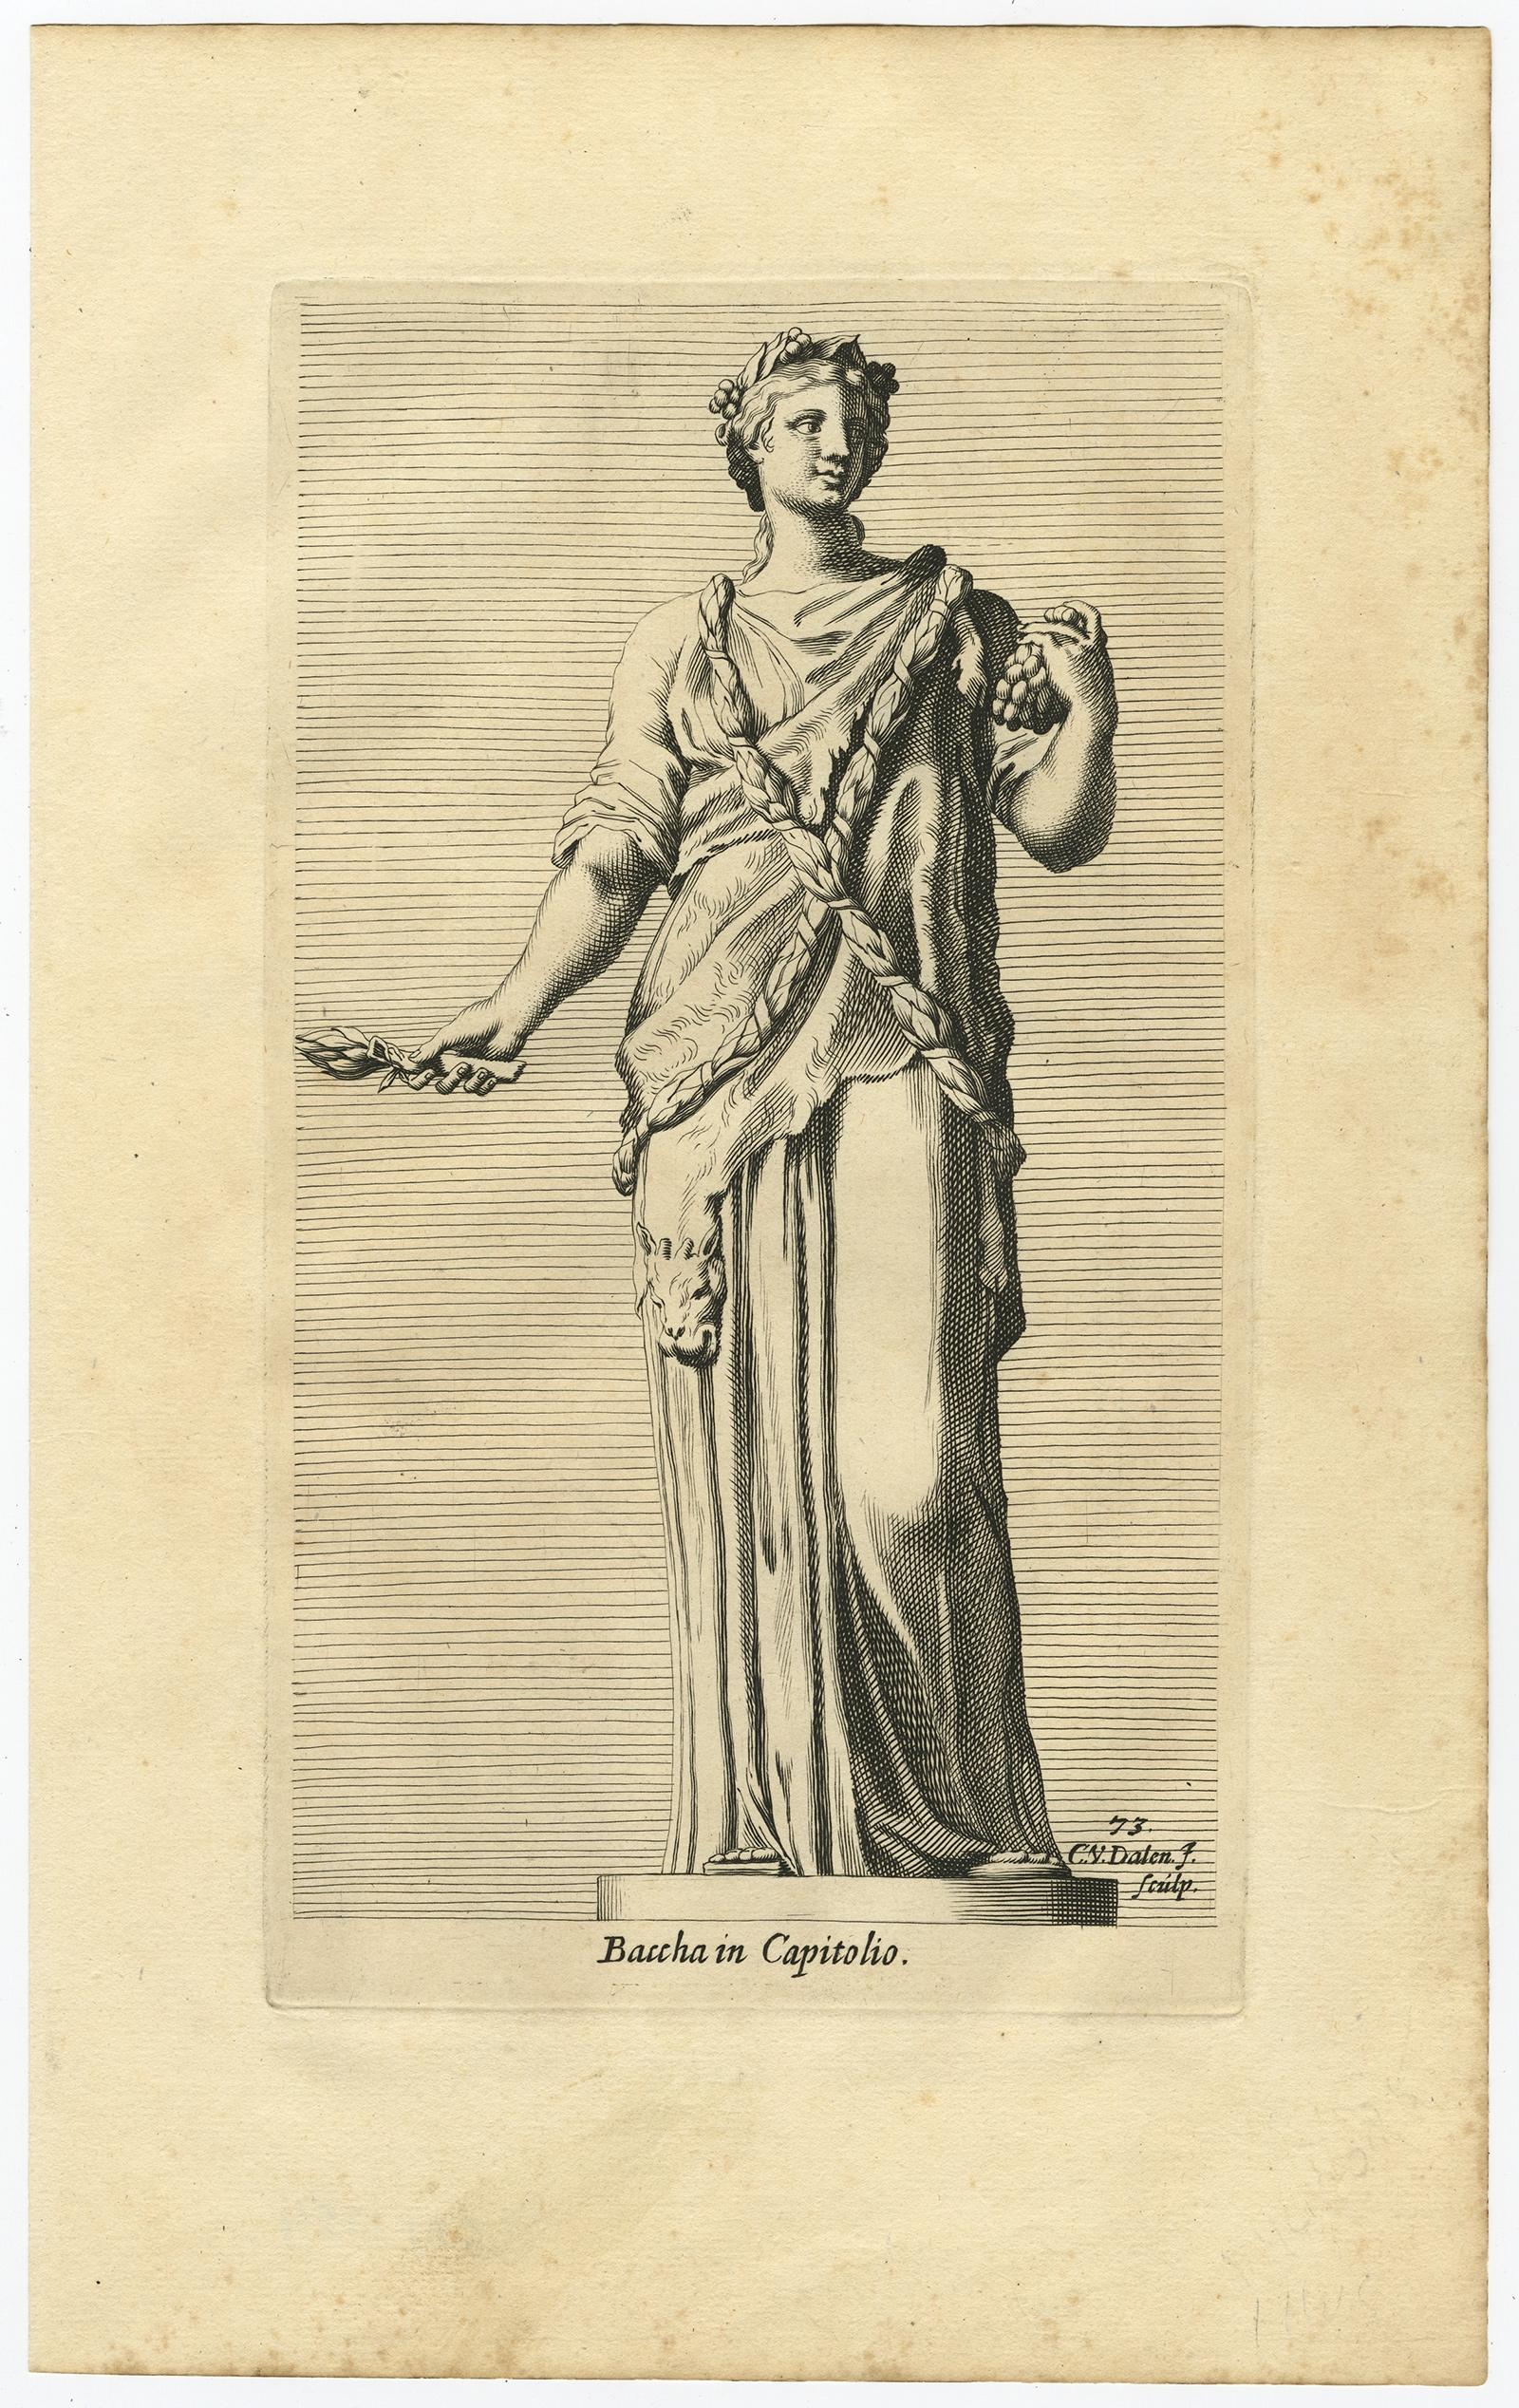 Description: antique print, titled: 'Baccha in Capitolio.' 

Statue of Bacchus or Dionysus, the god of the grape harvest, winemaking and wine, of ritual madness, fertility, theatre and religious ecstasy in ancient Greek religion and myth.

From